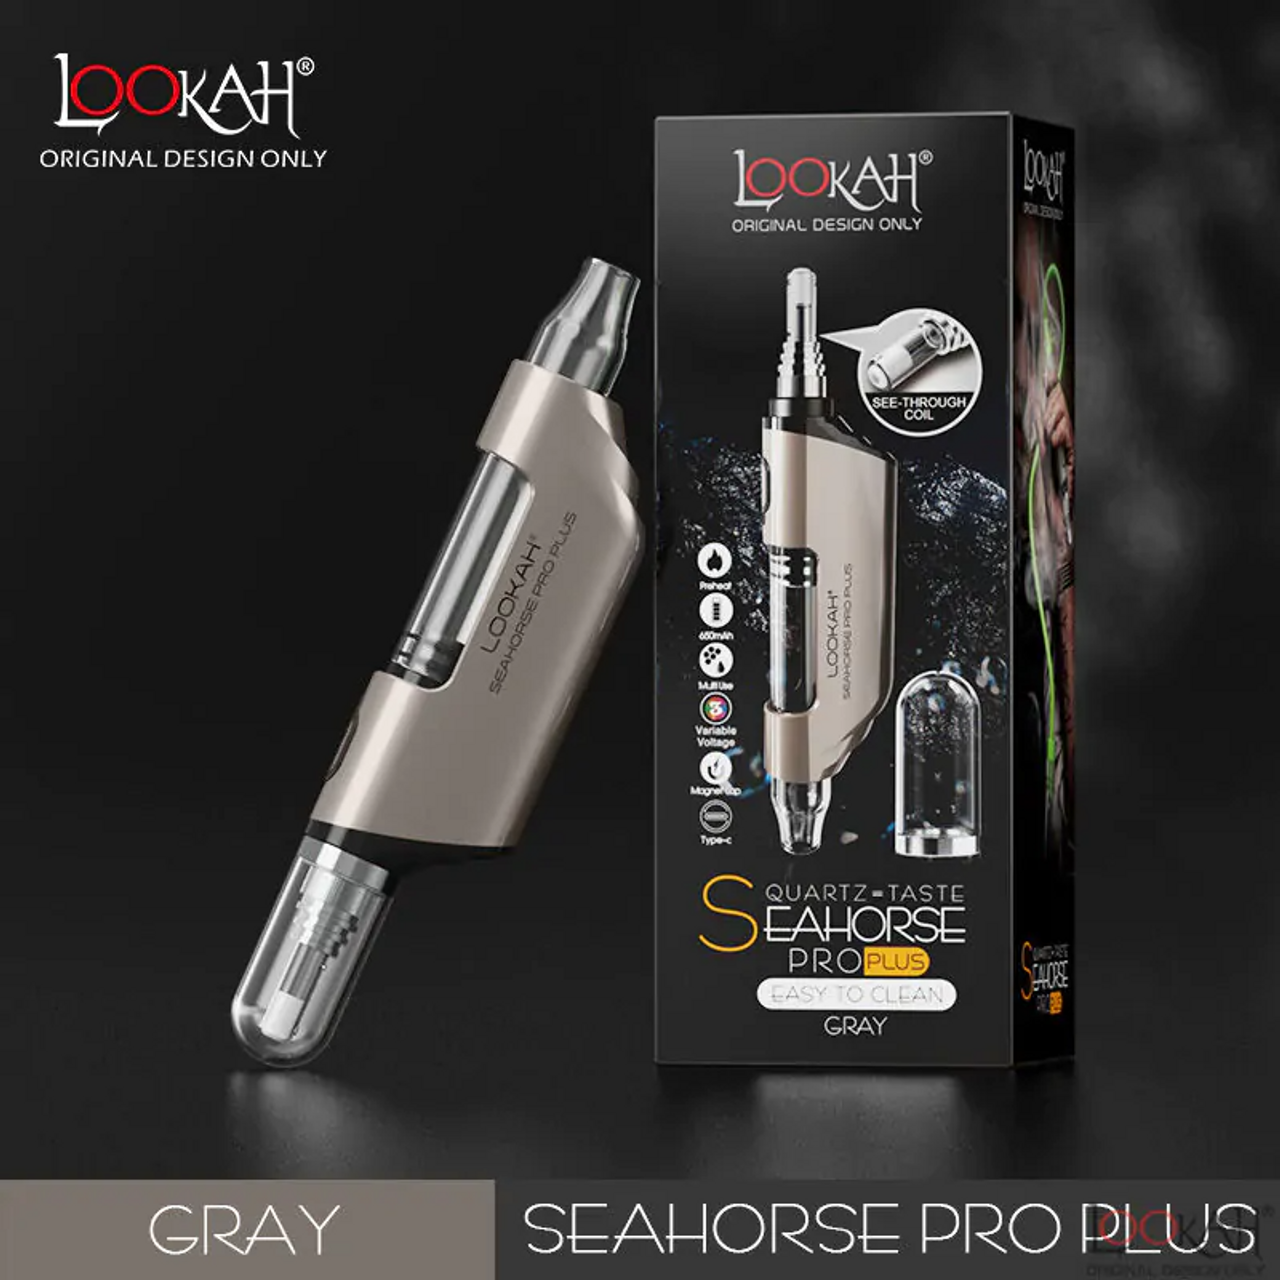 Lookah Seahorse Pro Plus at The Cloud Supply